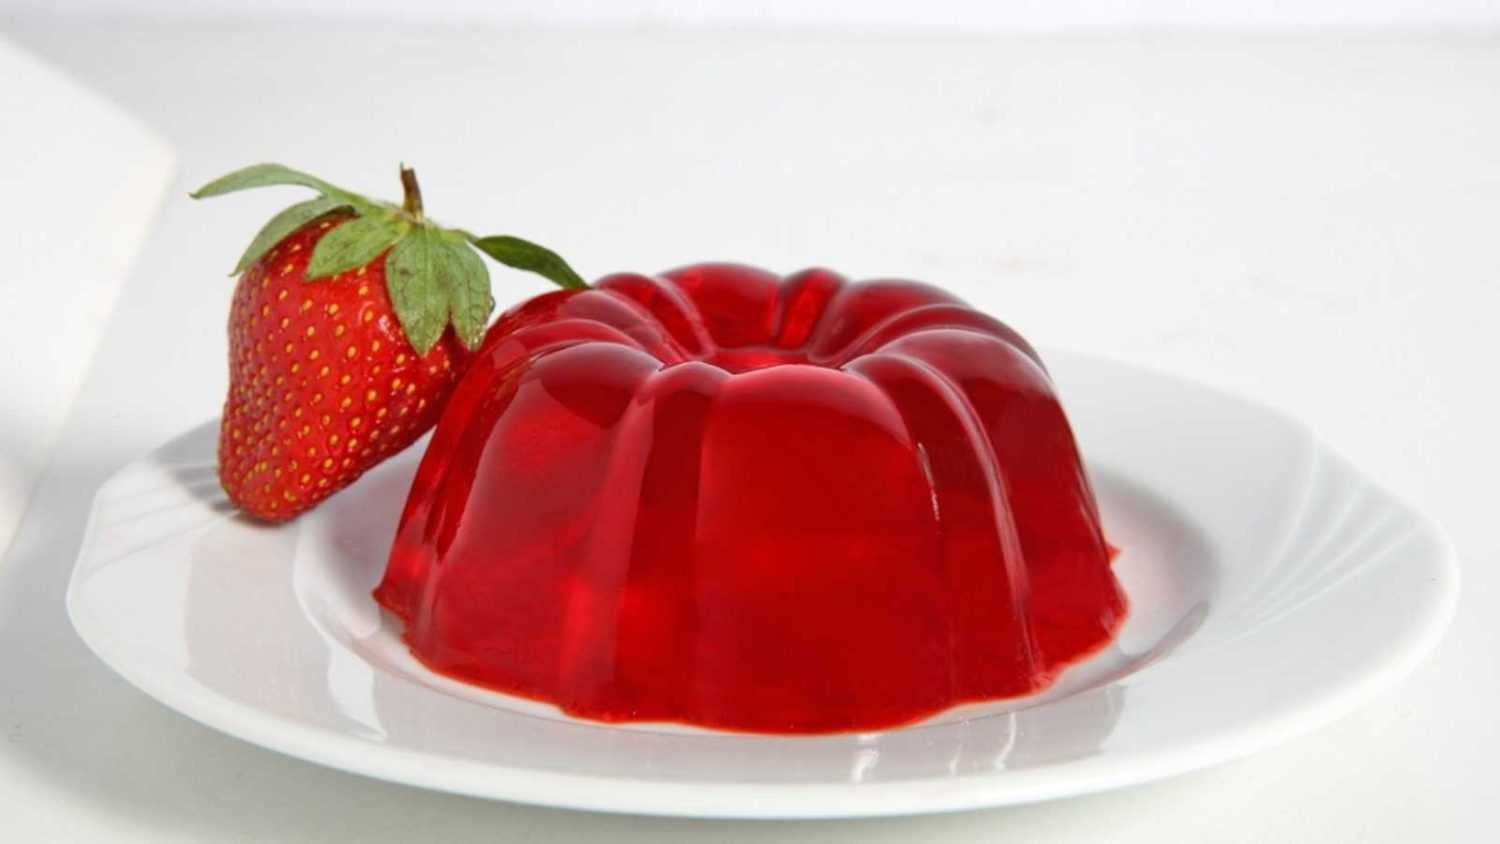 Jelly containing artificial food additives